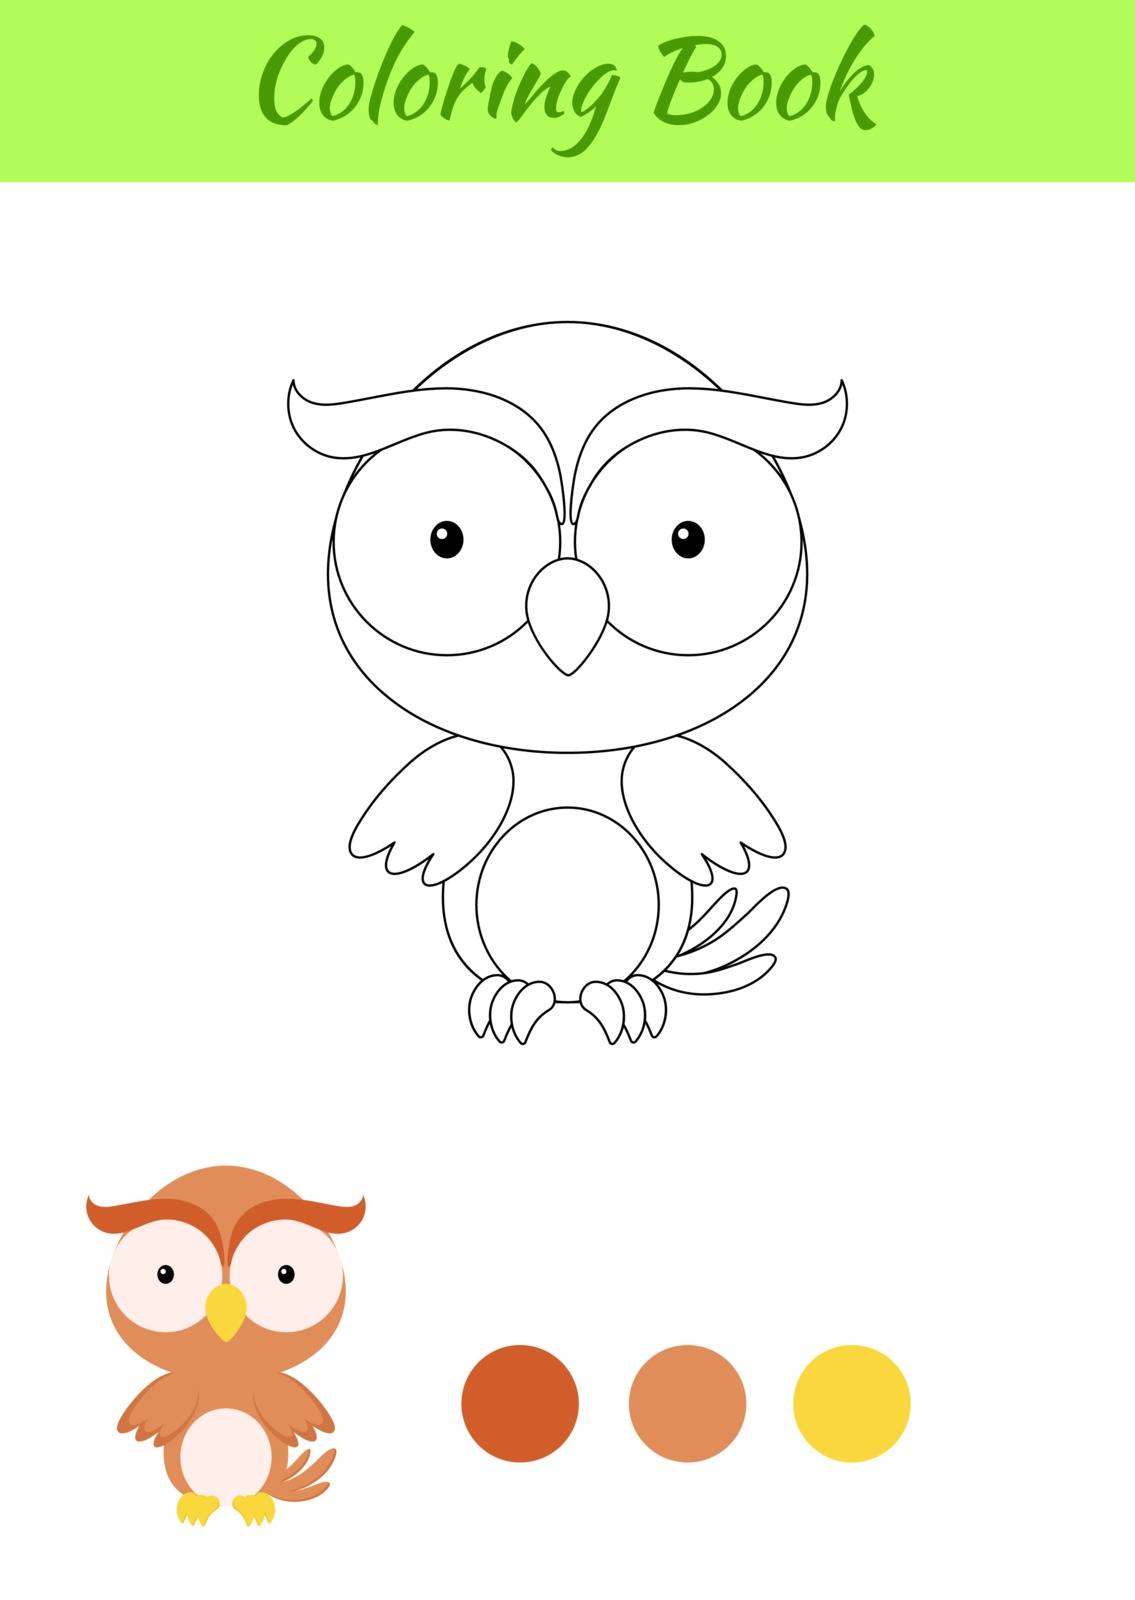 Coloring page happy little baby owl. Printable coloring book for kids. Educational activity for kindergarten and preschool with cute animal. Flat cartoon colorful vector illustration.